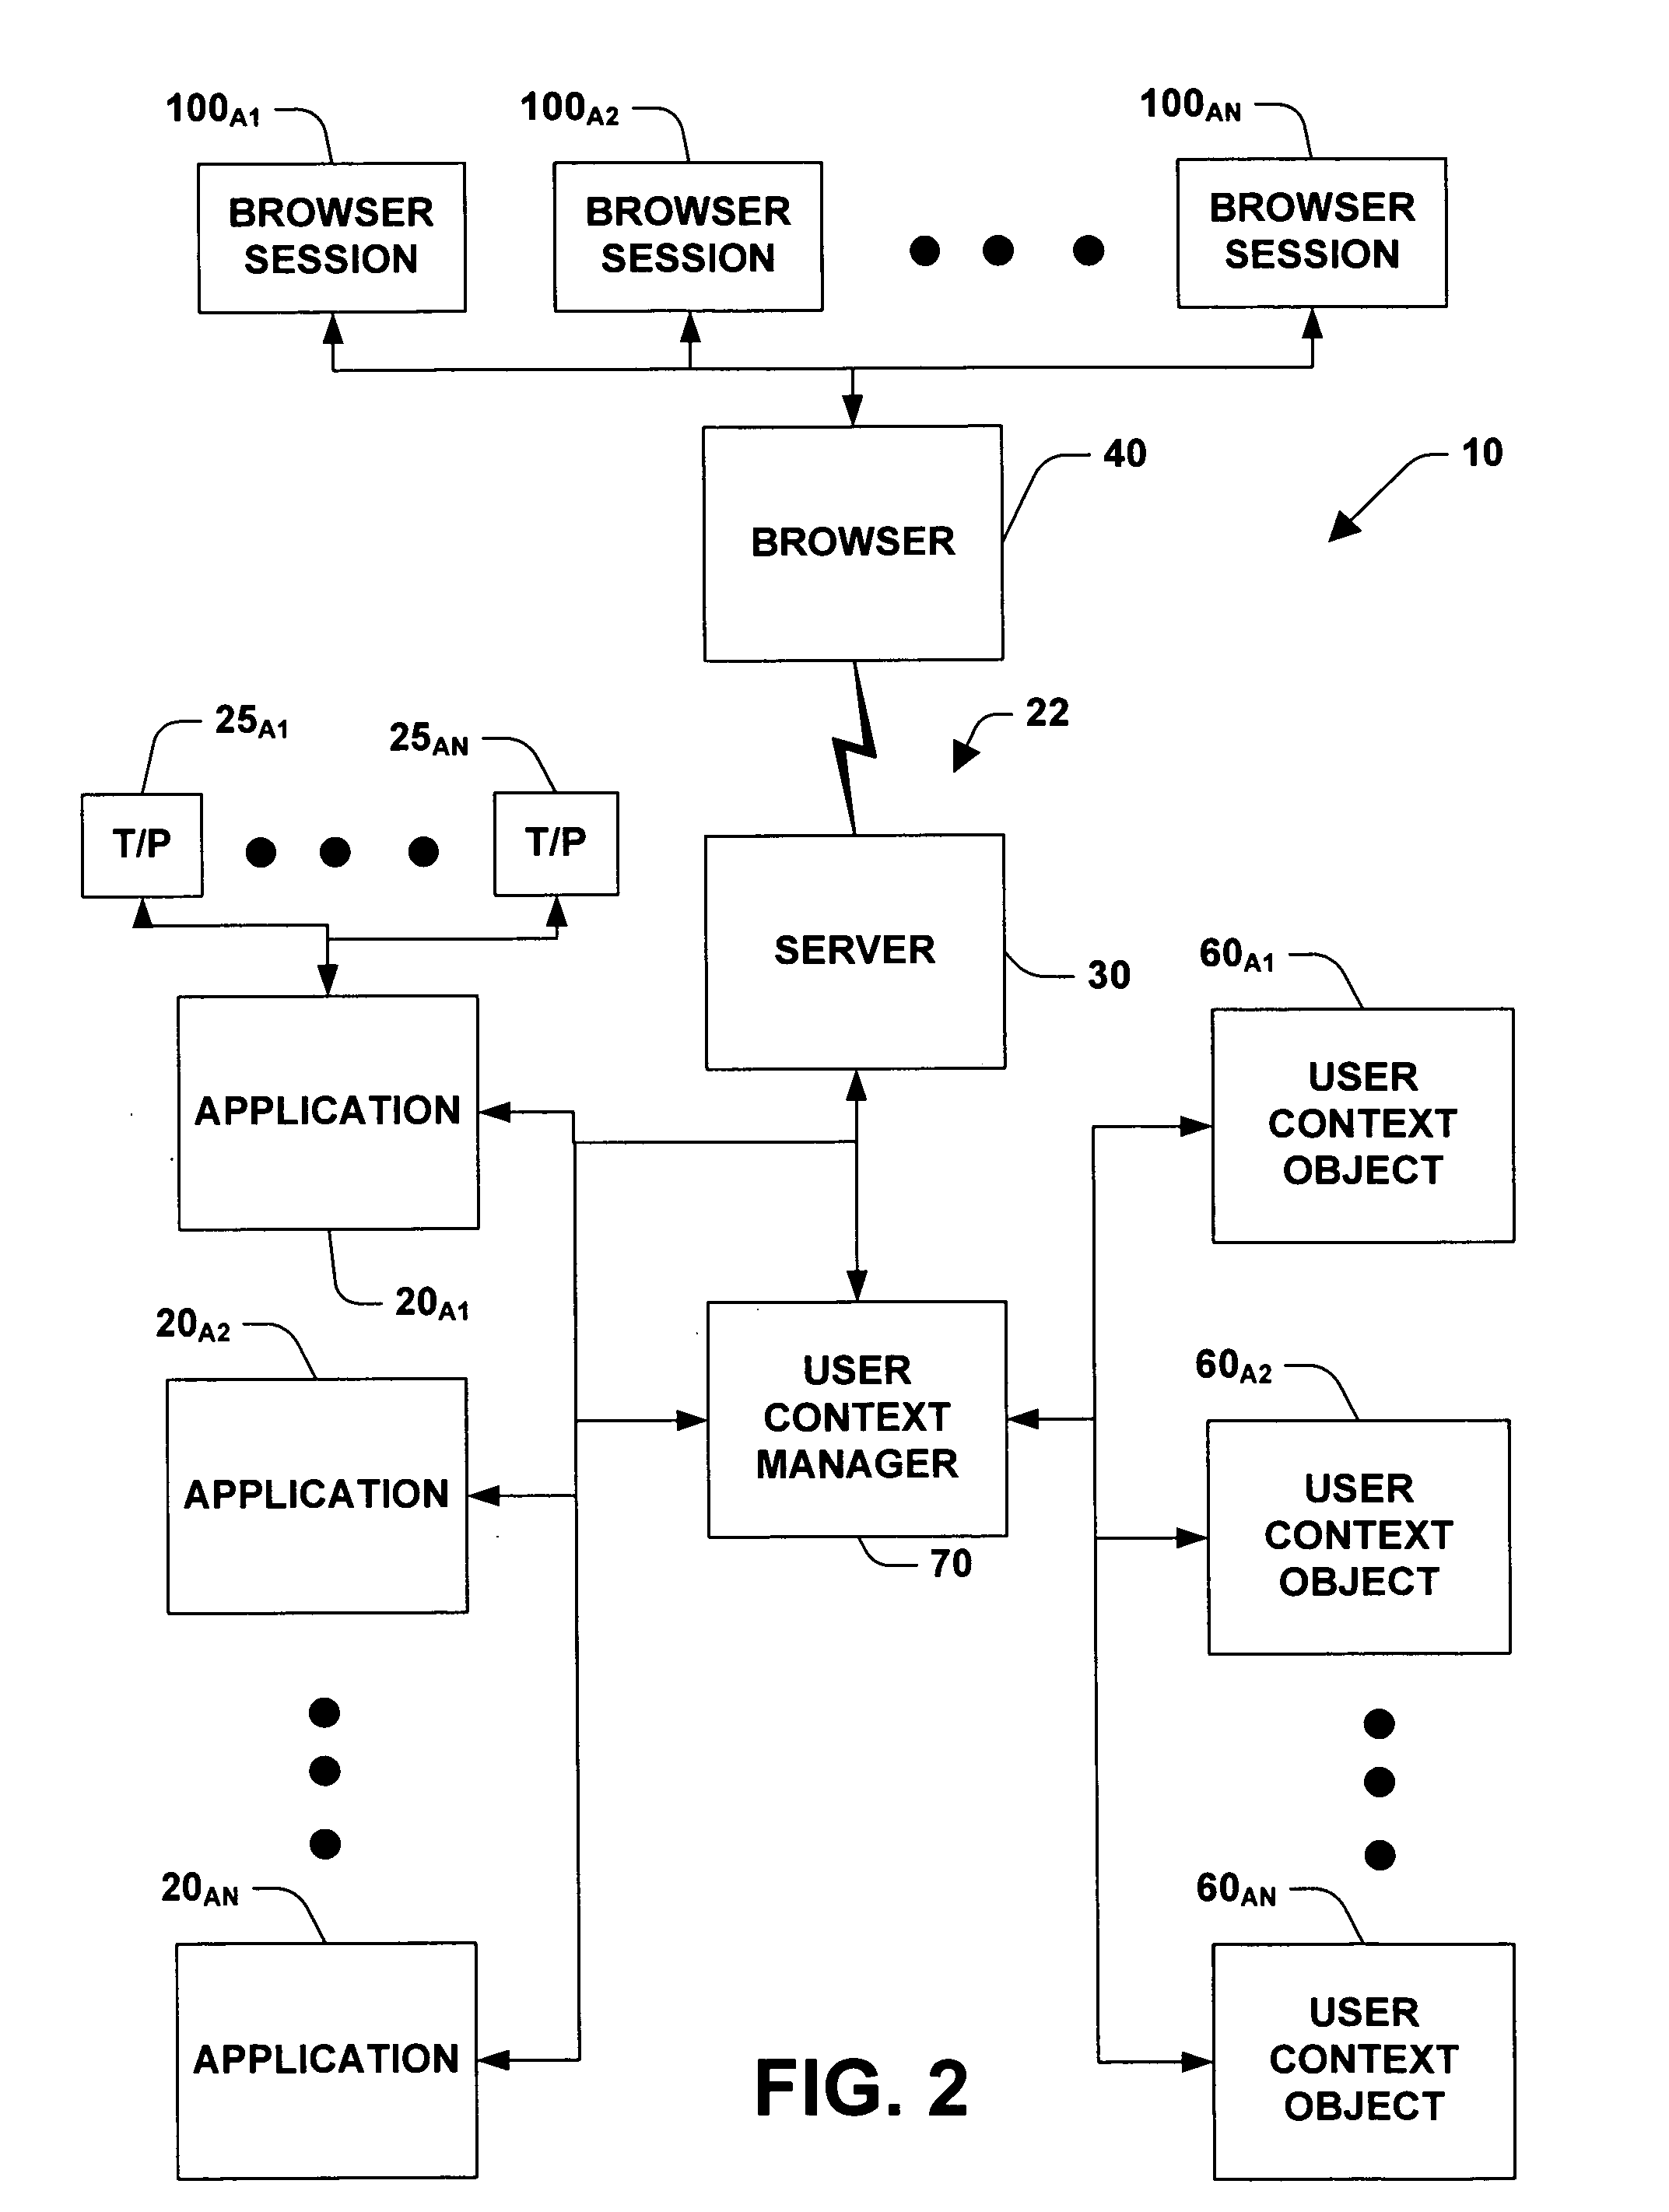 System and method for managing states and user context over stateless protocols